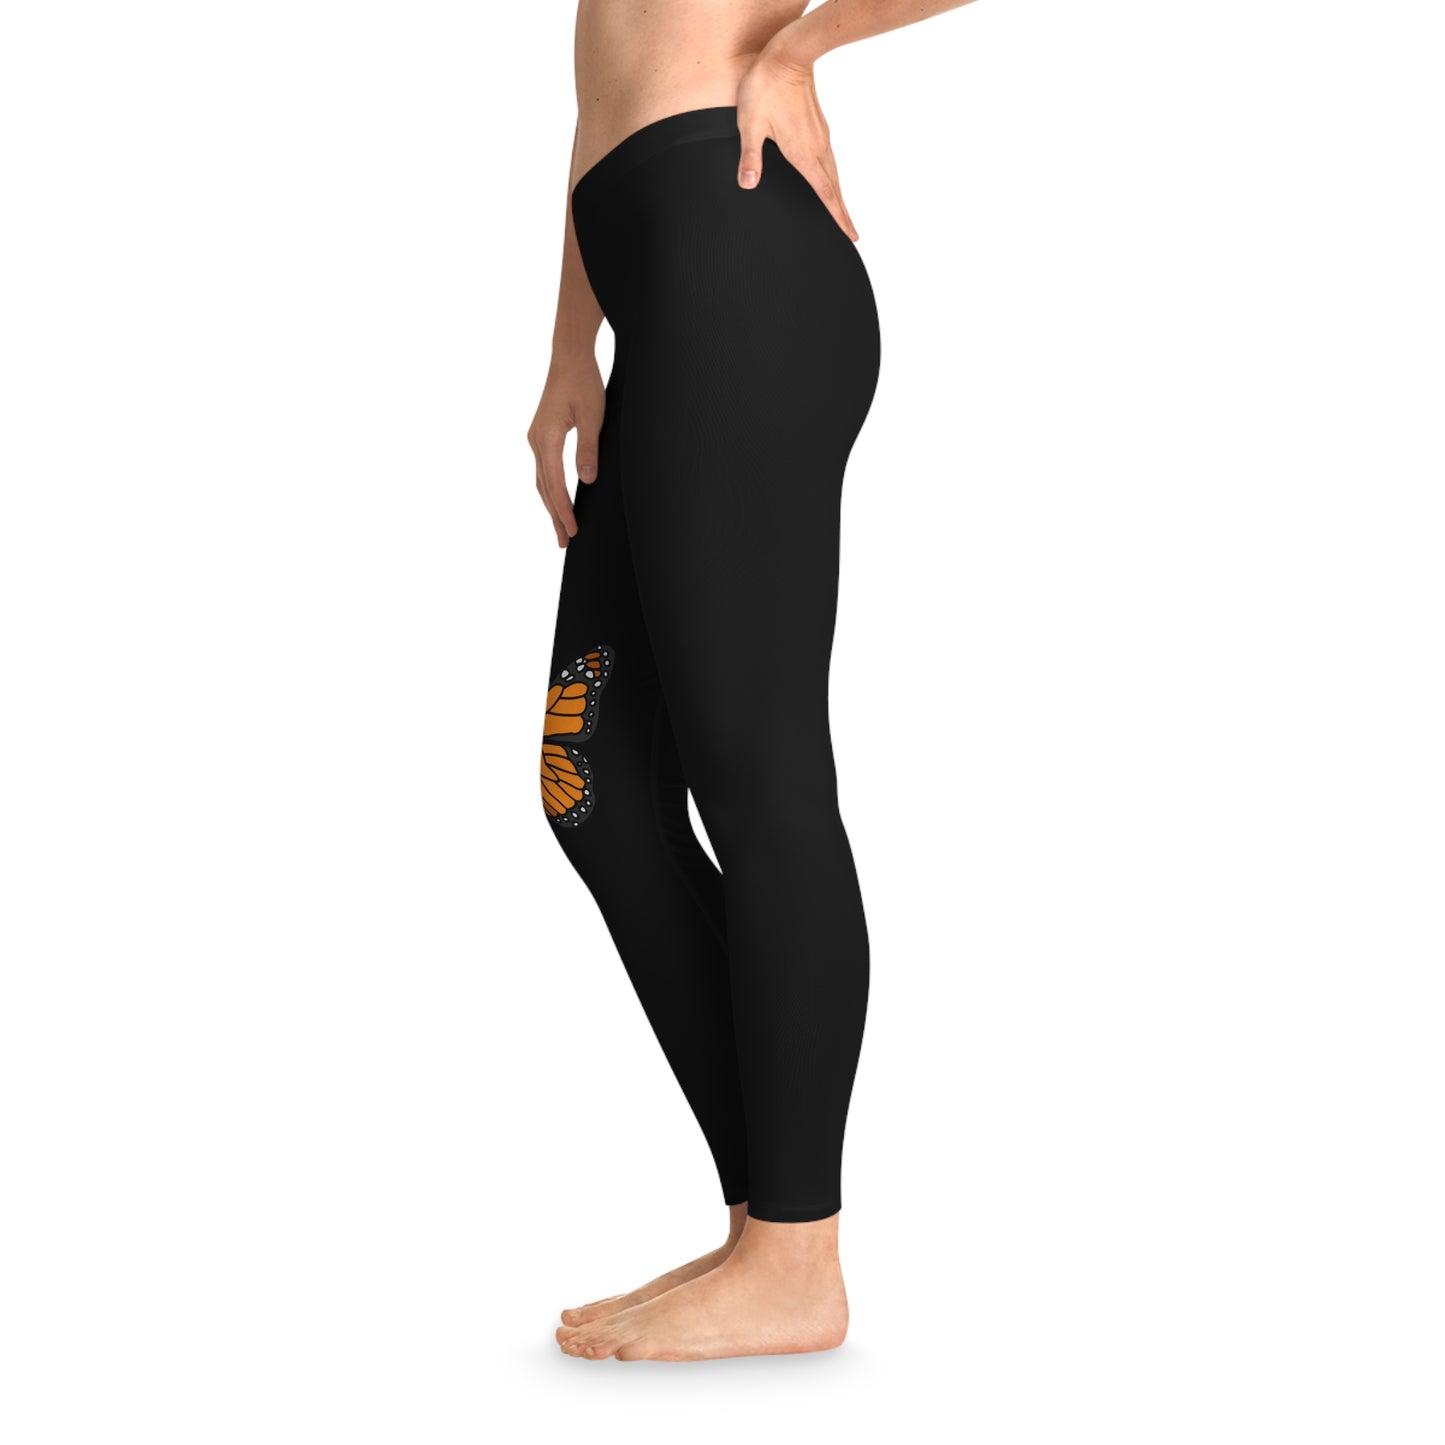 BUTTTERFLY Stretchy Leggings